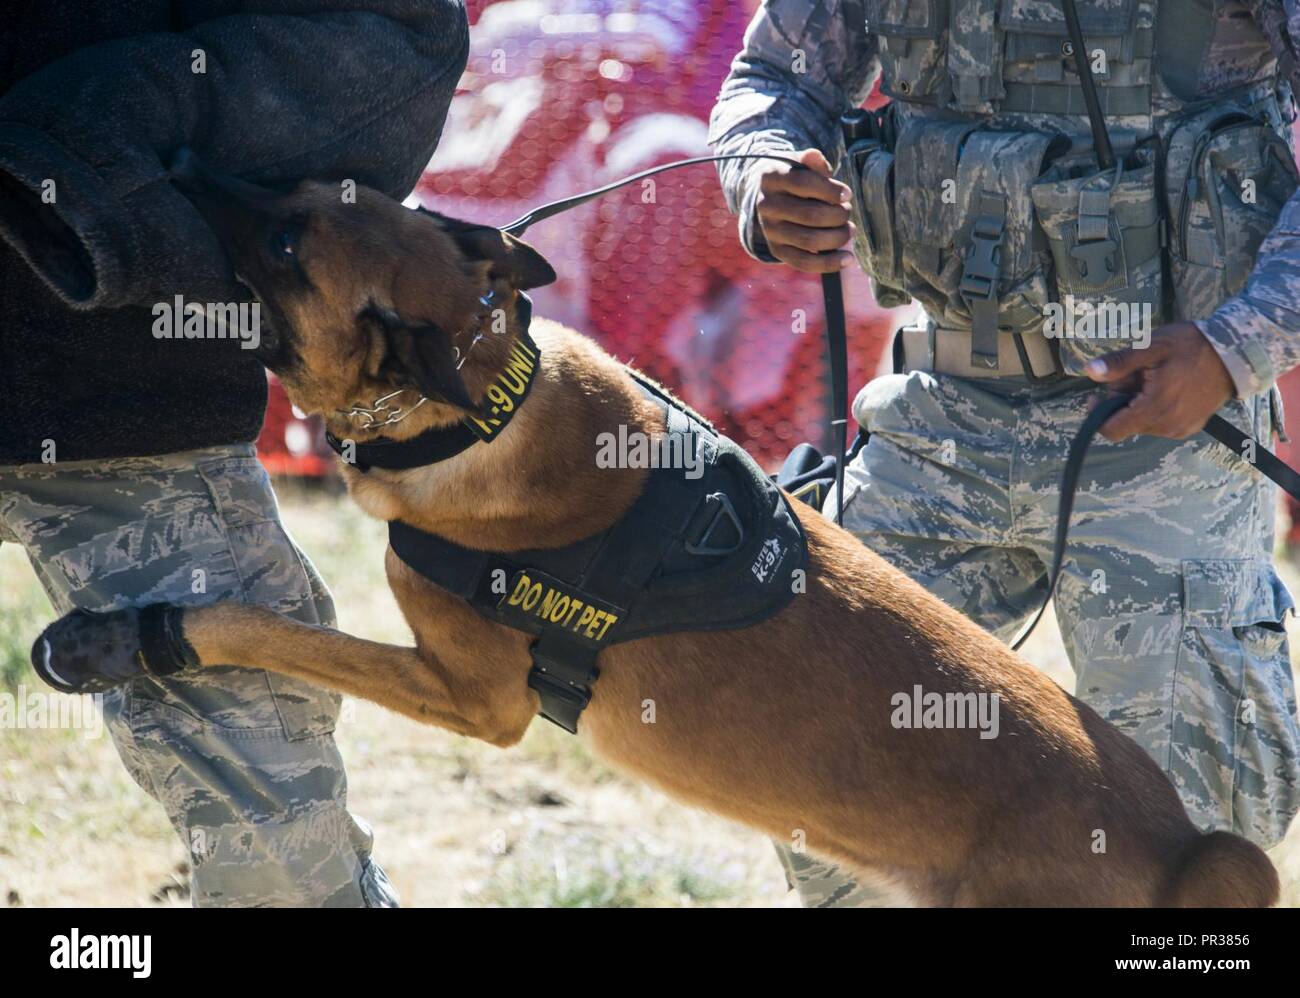 Uutah, 92nd Security Forces Squadron military working dog, lunges at an Airman during a K-9 demonstration at SkyFest 2017 Air Show and Open House at Fairchild Air Force Base, Washington, July 30, 2017. SkyFest is Fairchild’s air show and open house to give the local and regional community the opportunity to meet Airmen and learn about the Air Force mission. Stock Photo